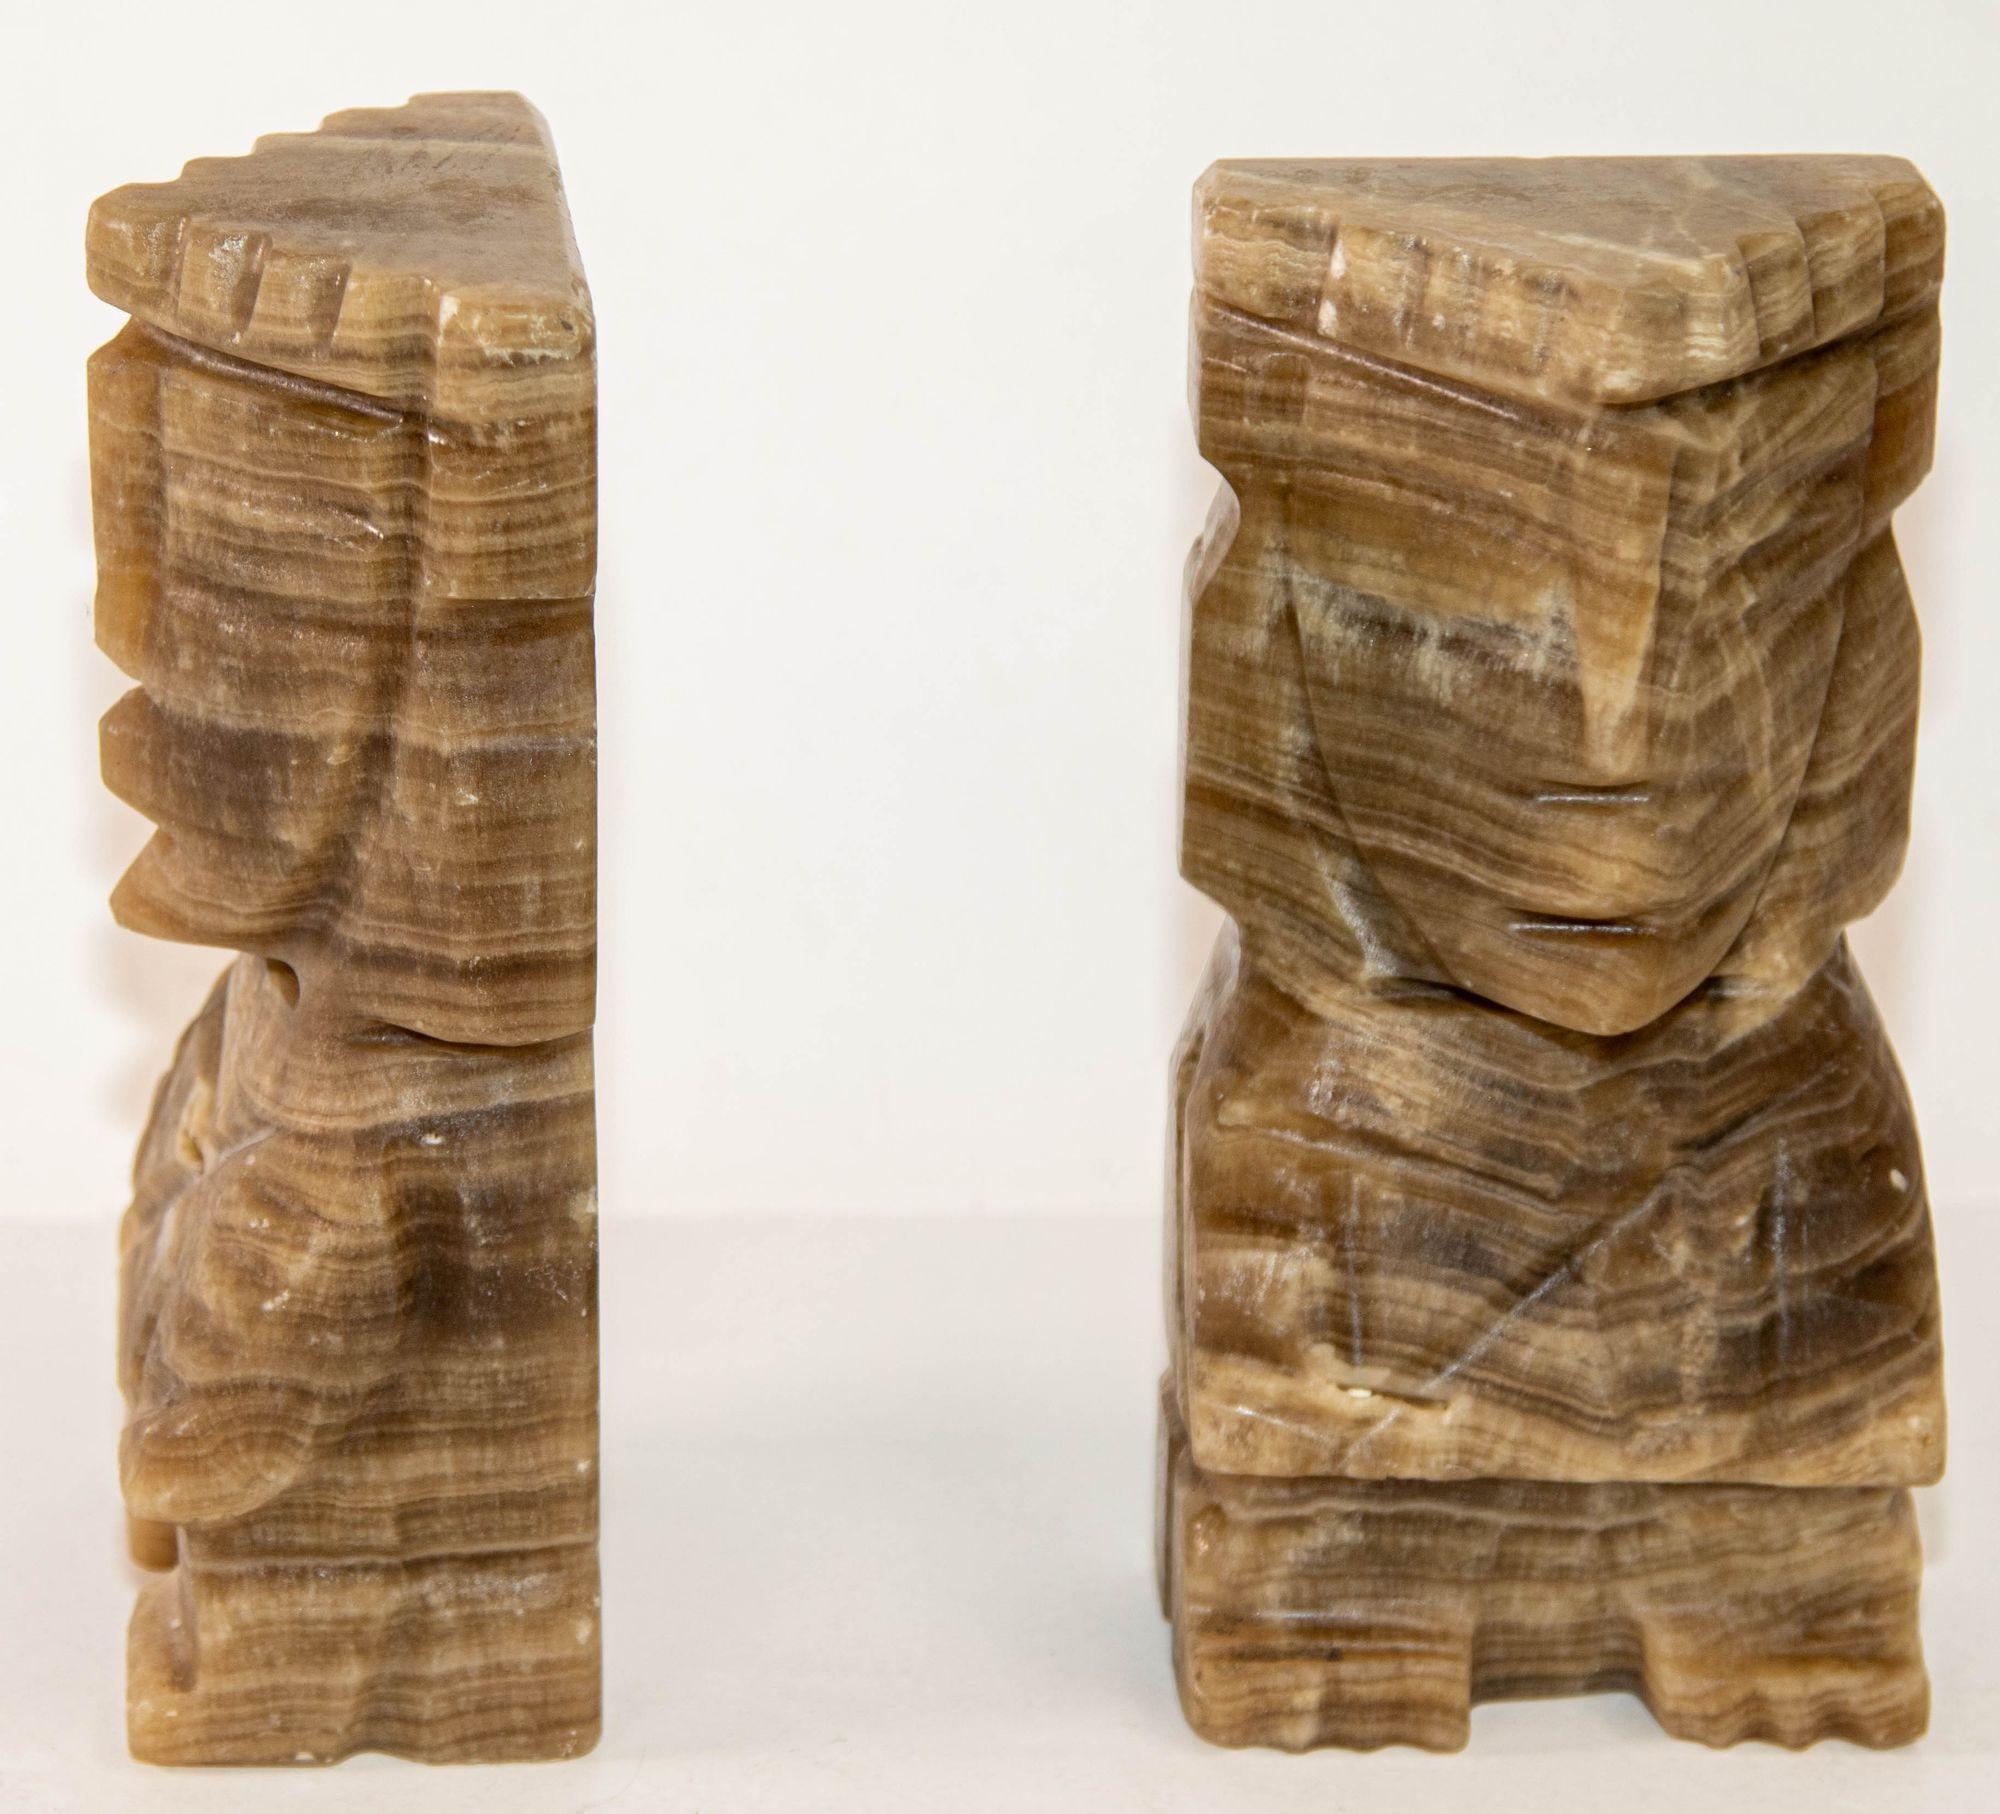 Vintage 1950s Pair of Carved Aztec Onyx Stone Bookends.
Mexican Aztec Mayan Figure Onyx Book Ends.Hand carved marble stone pyramid Aztec Mayan. 
Pair of vintage marble onyx Aztec Mayan stone bookends. Vintage handcrafted large heavy natural marble